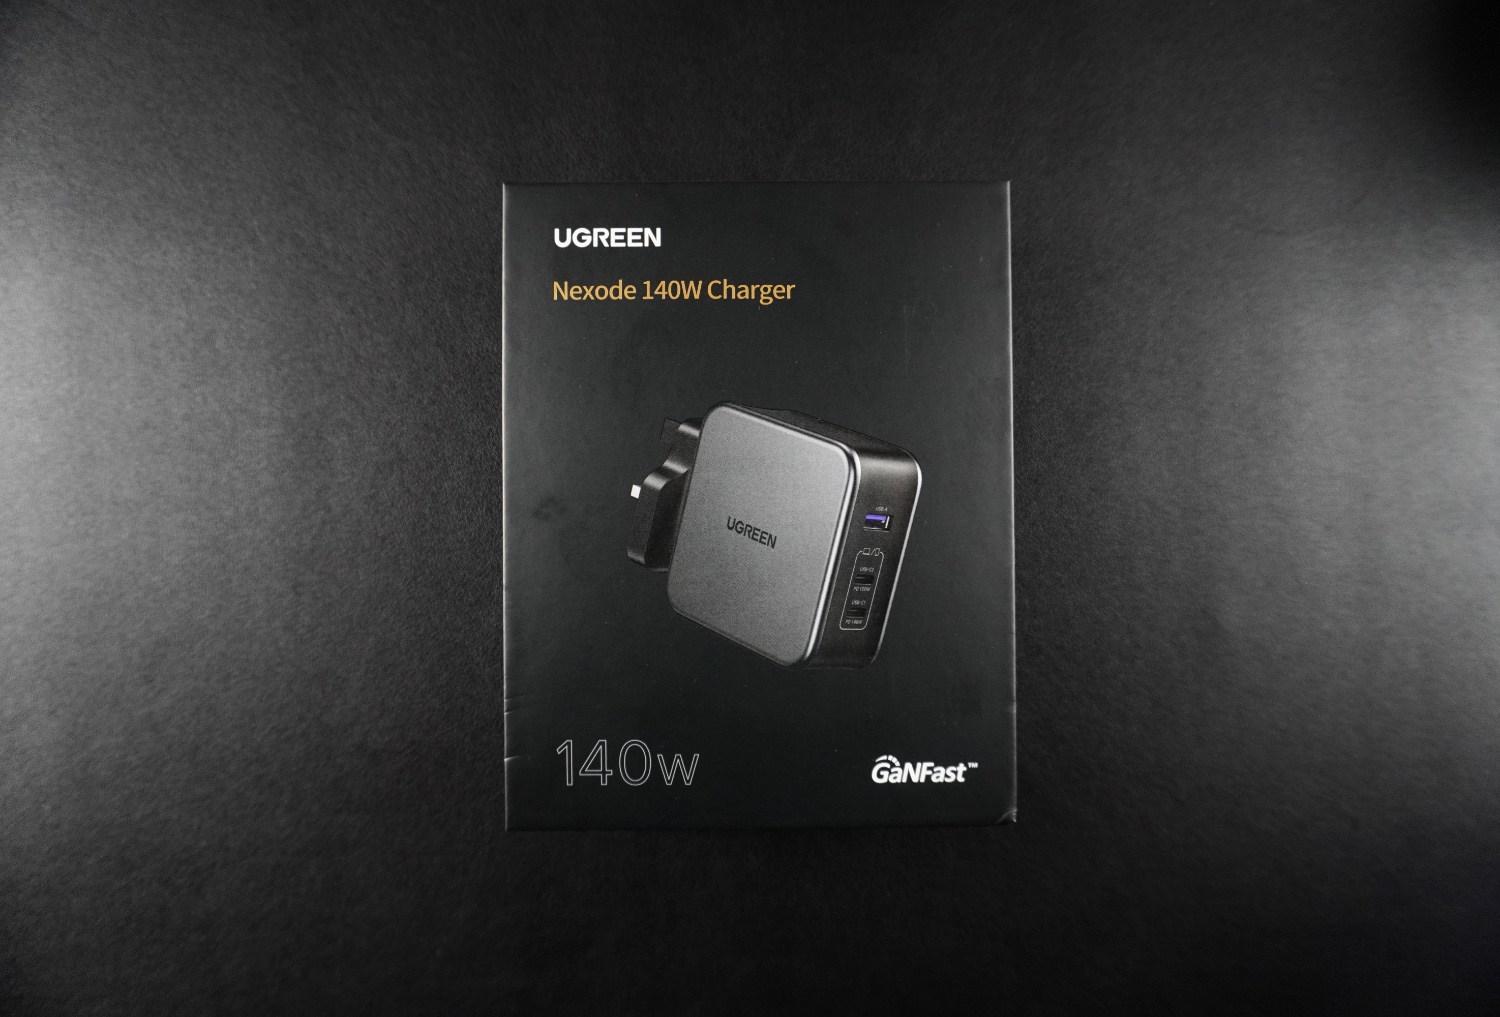 UGreen Nexode 140W charger review - One charger to replace them